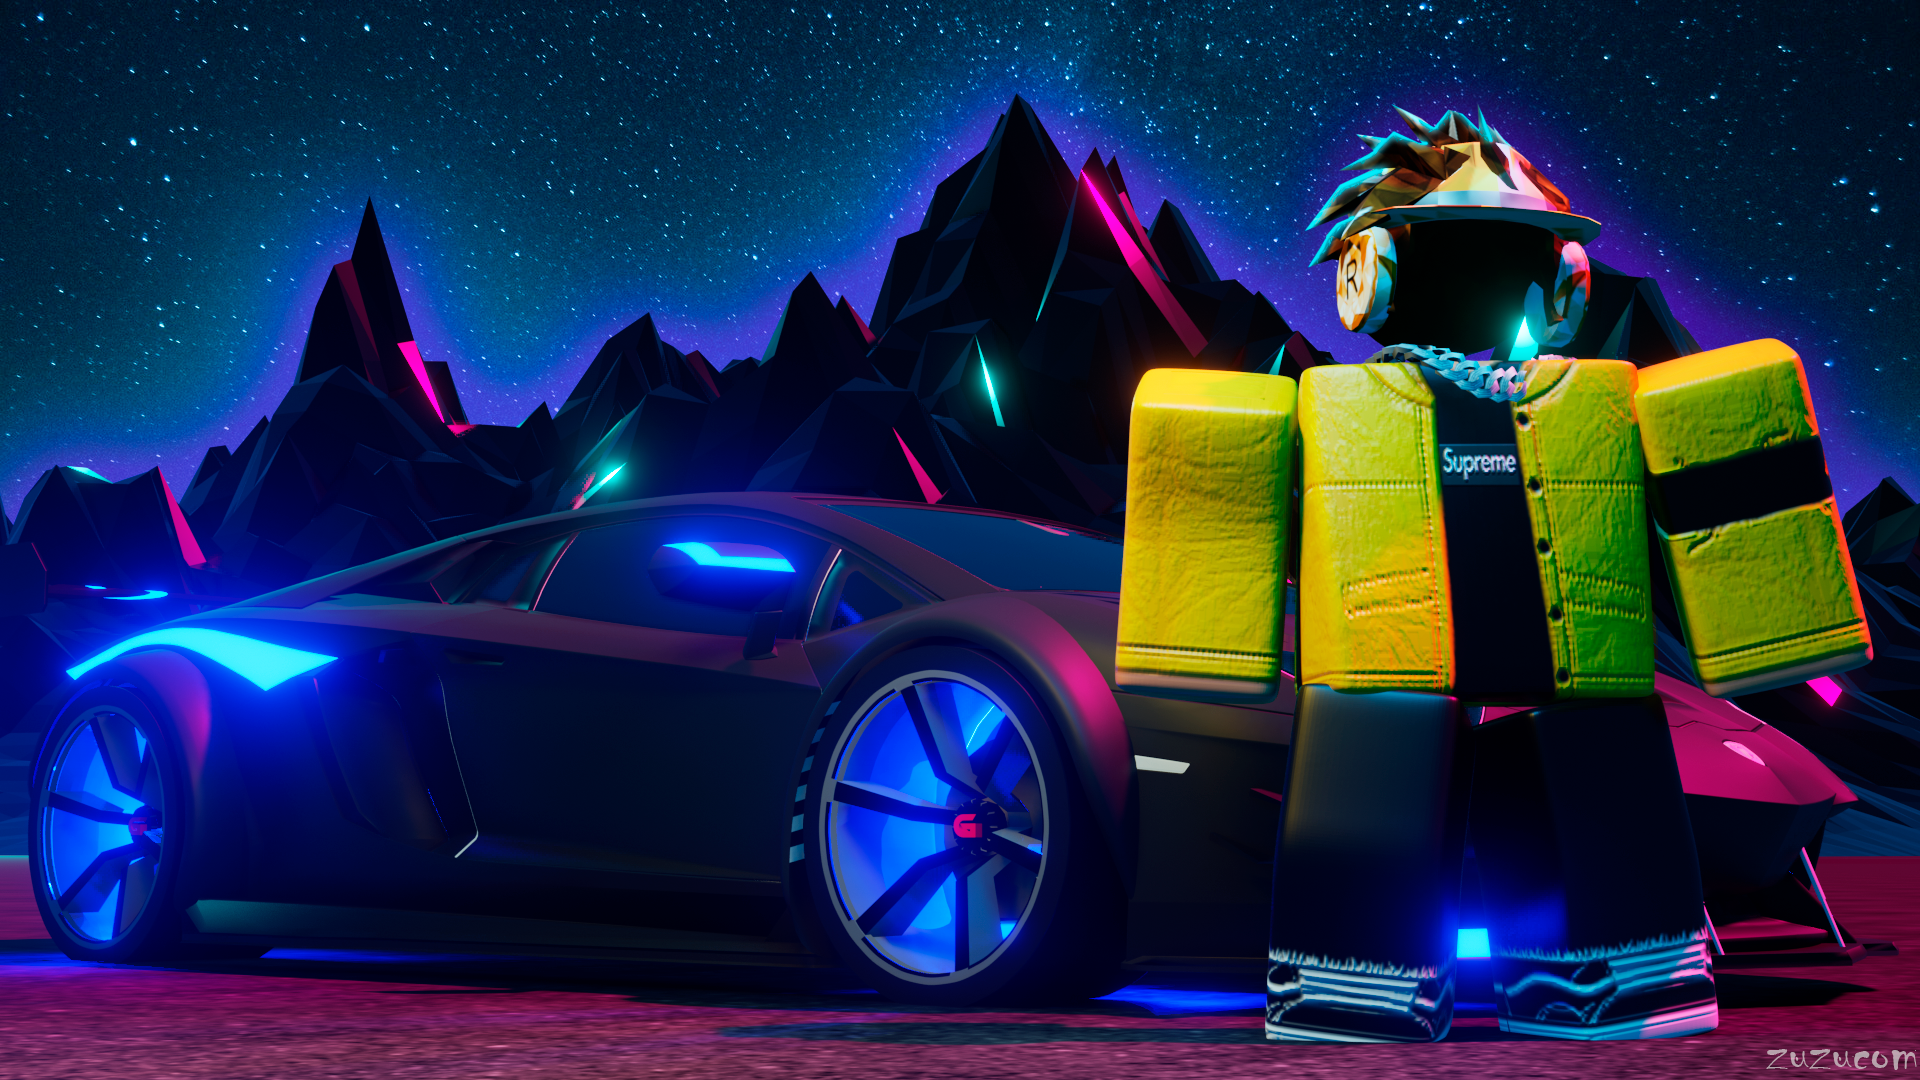 Cool Roblox Wallpapers